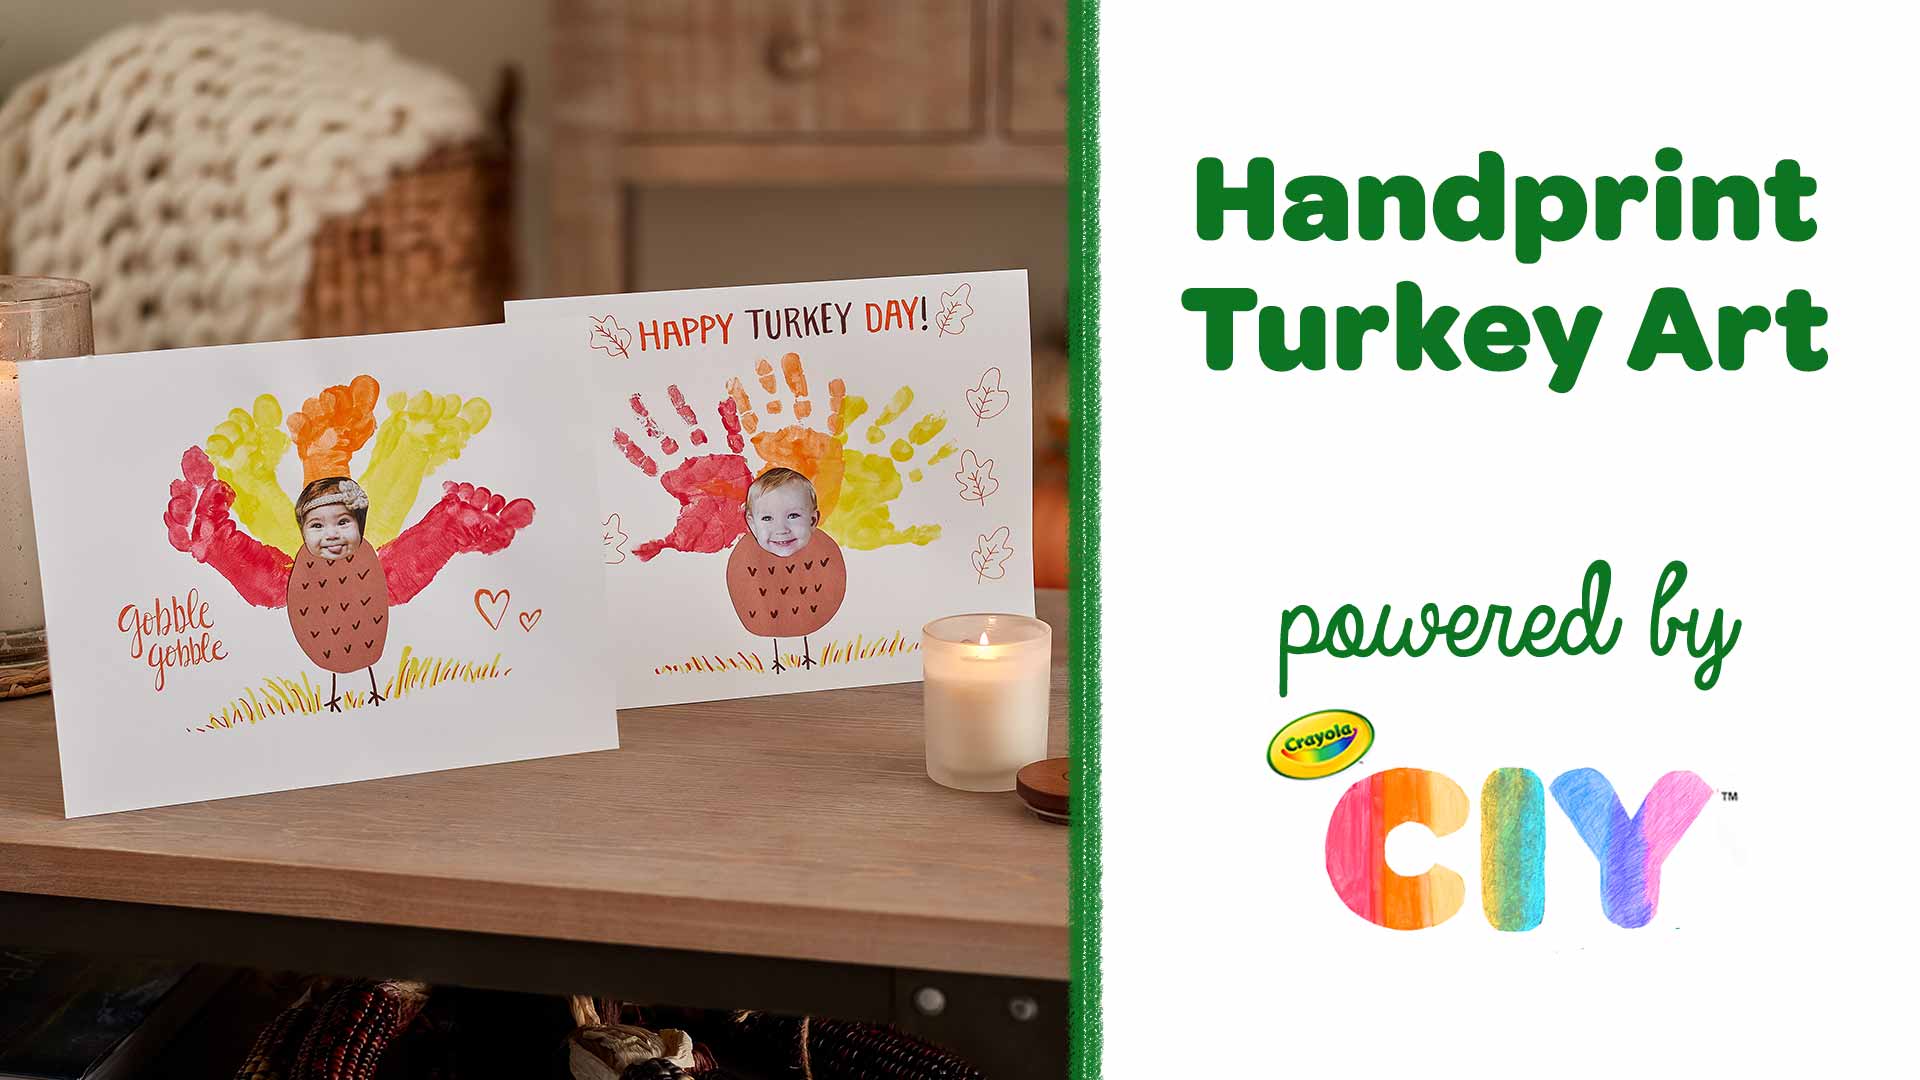 DIY　Kids　and　Turkey　Crafts　for　Crafts　Craft　CIY,　Adults　Kids　for　Handprint　Crayola